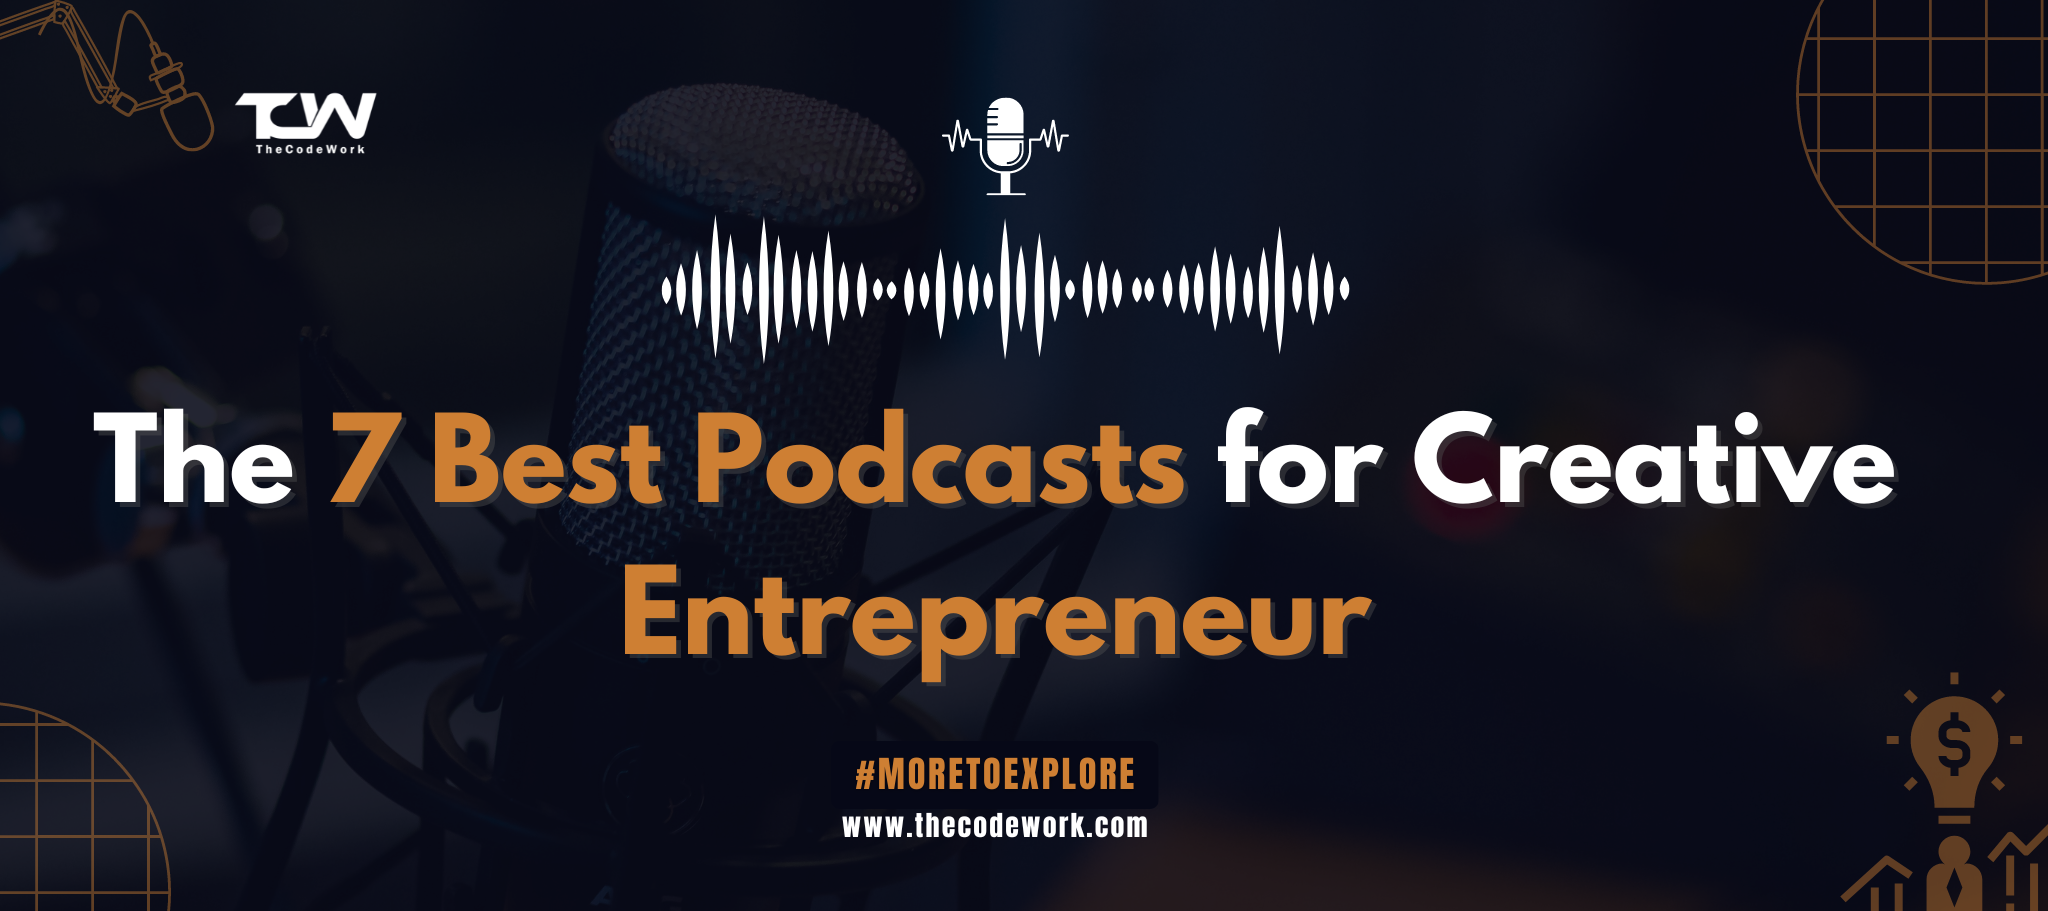 The 7 Best Podcasts for Creative Entrepreneur 